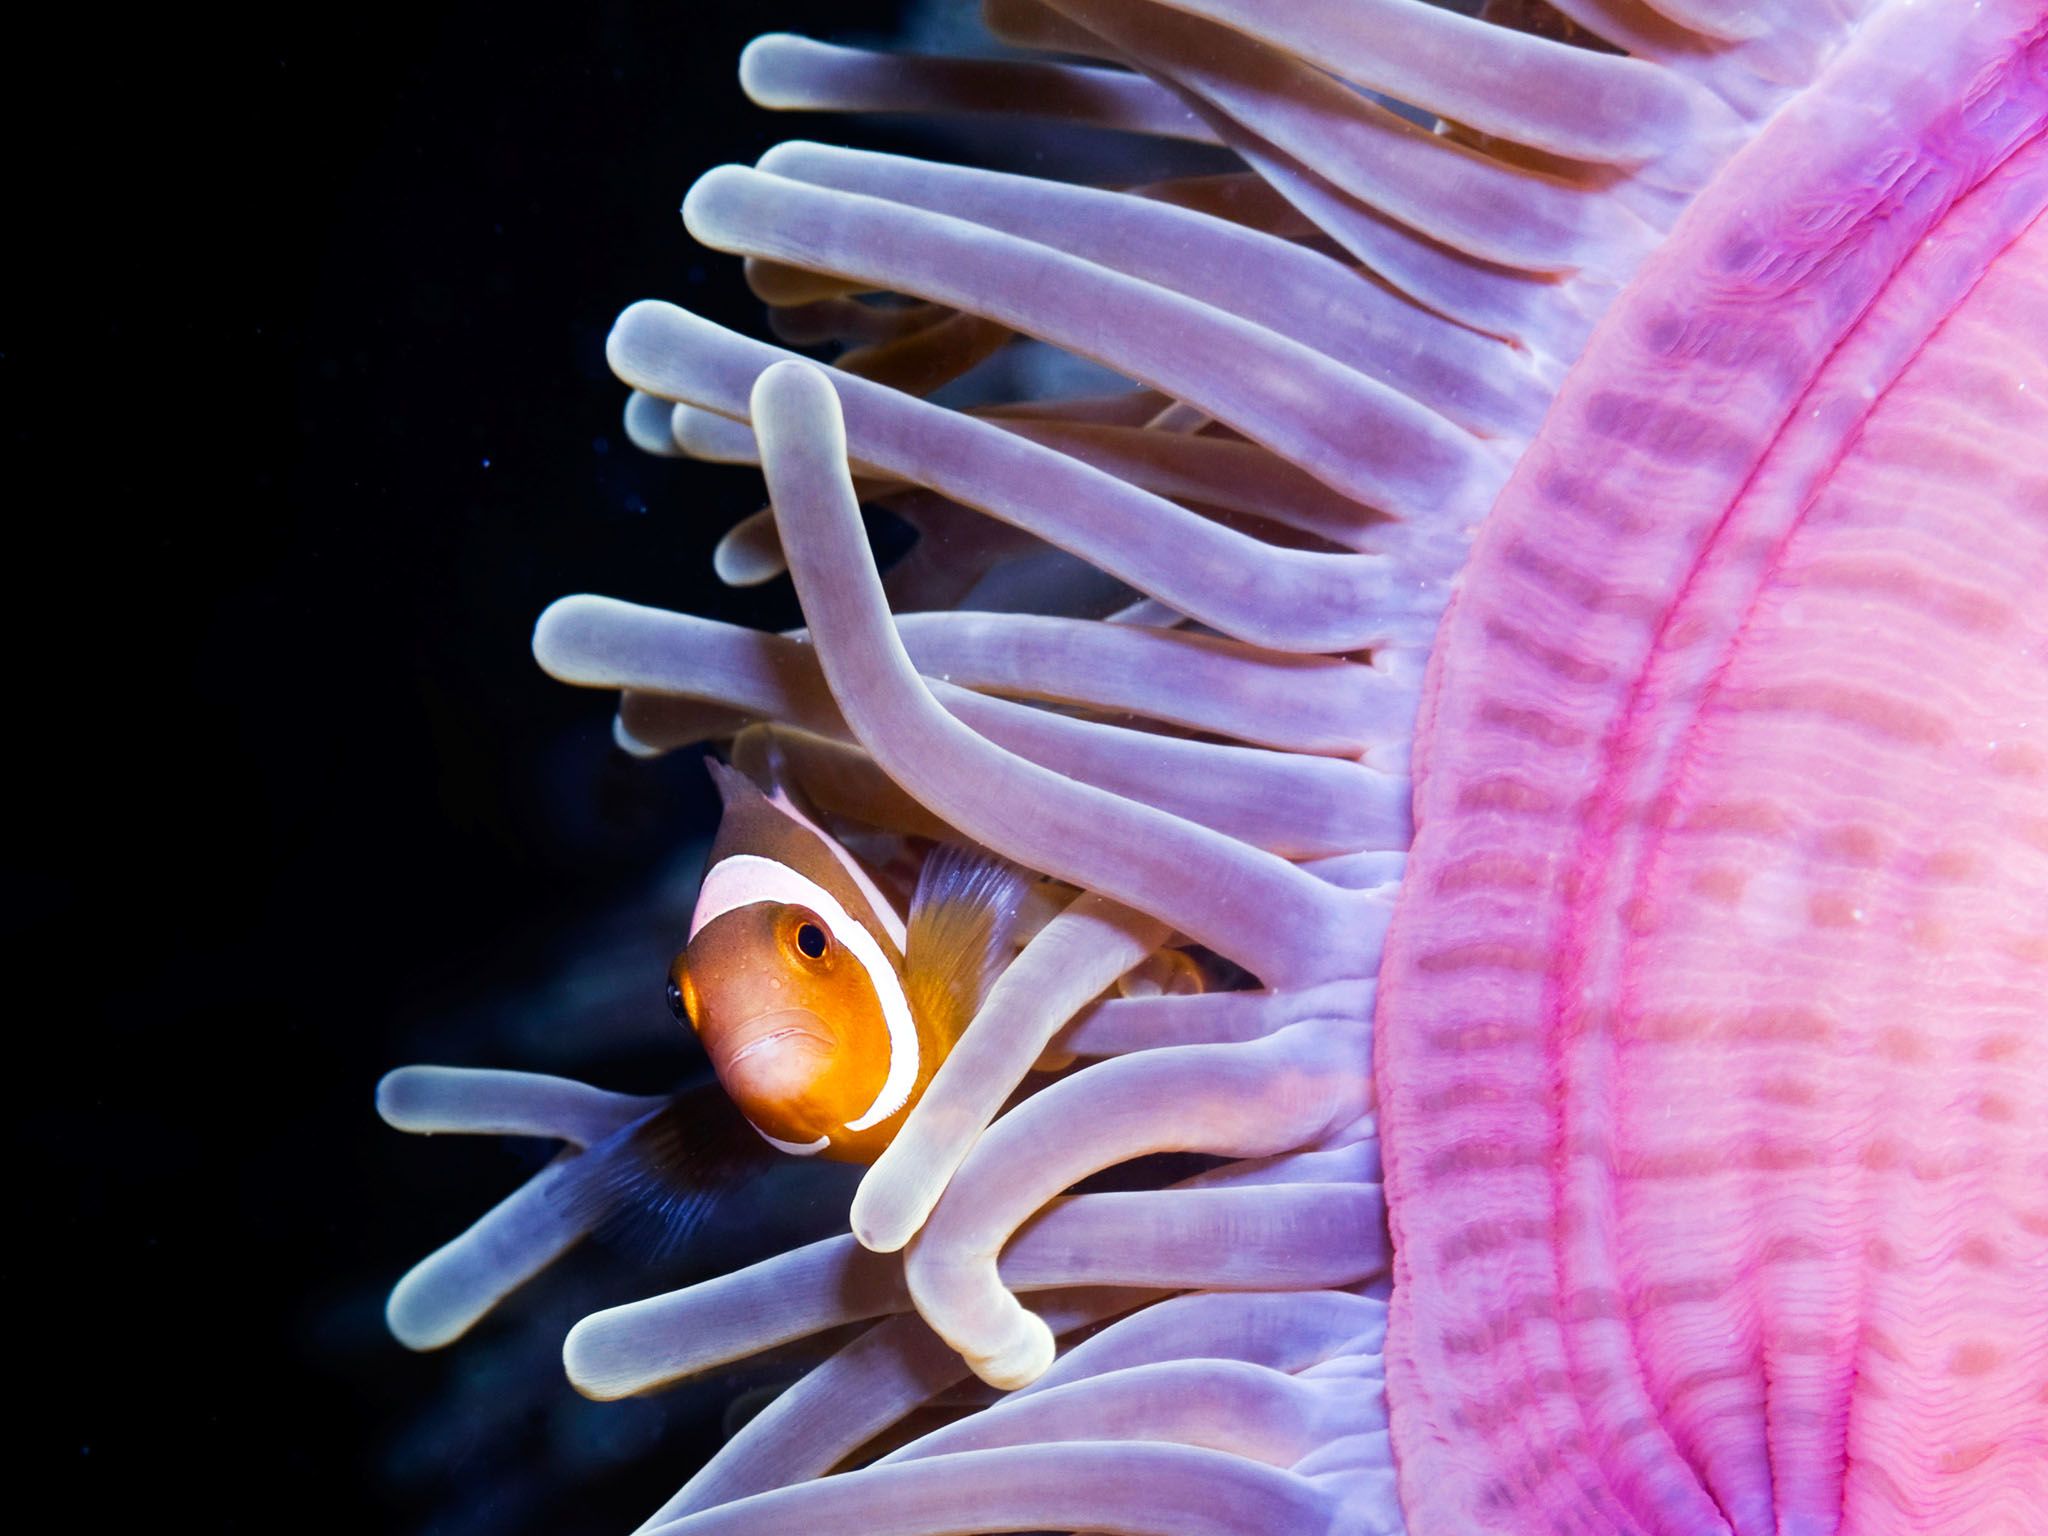 Clownfish bunker down among the venomous tentacles of the sea anemone. This image is from... [Photo of the day - August 2015]